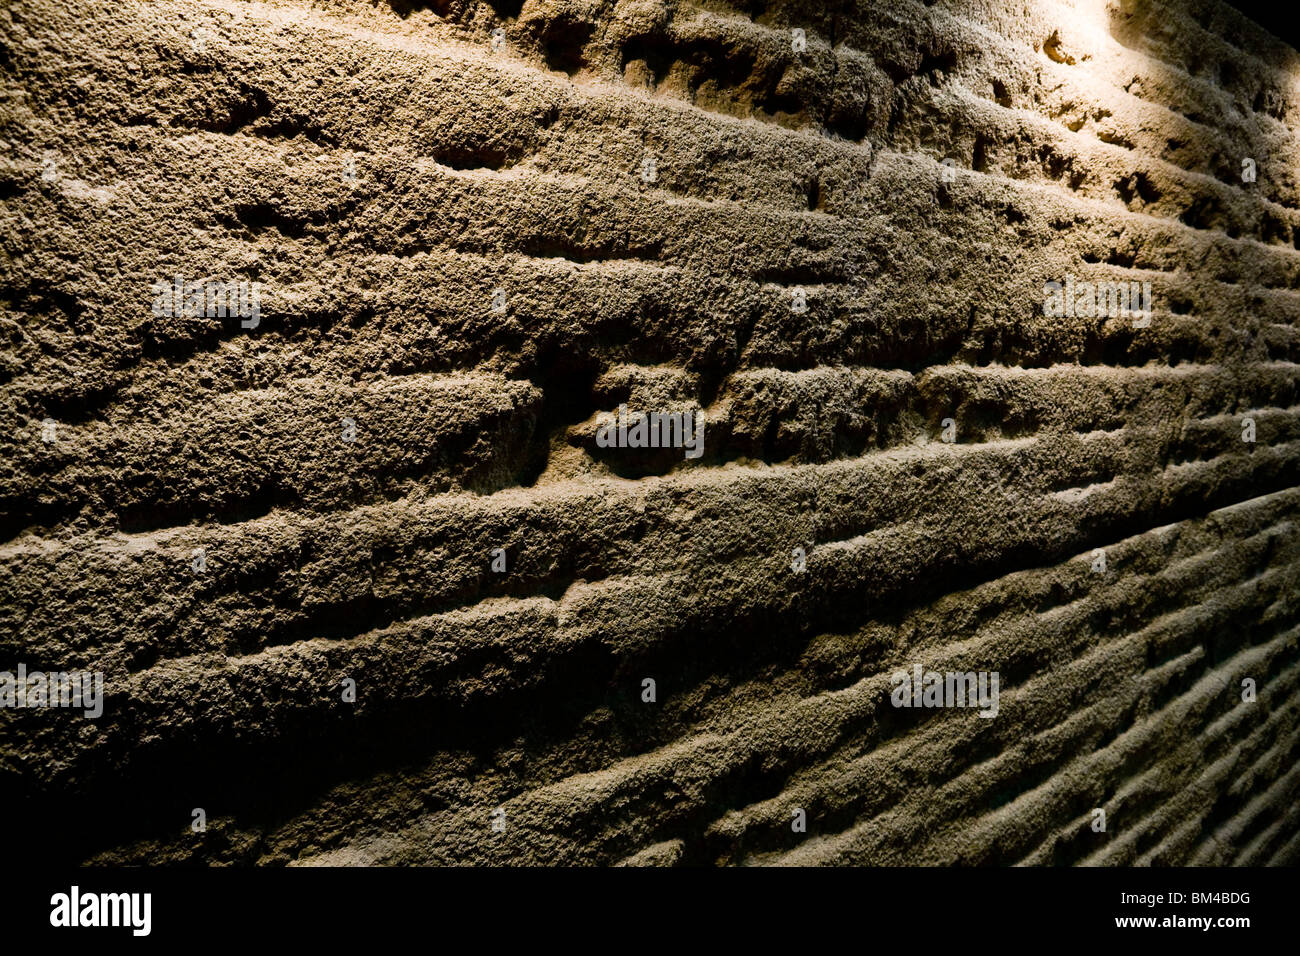 Isolated lamp lighting spot clay and soil wall Stock Photo